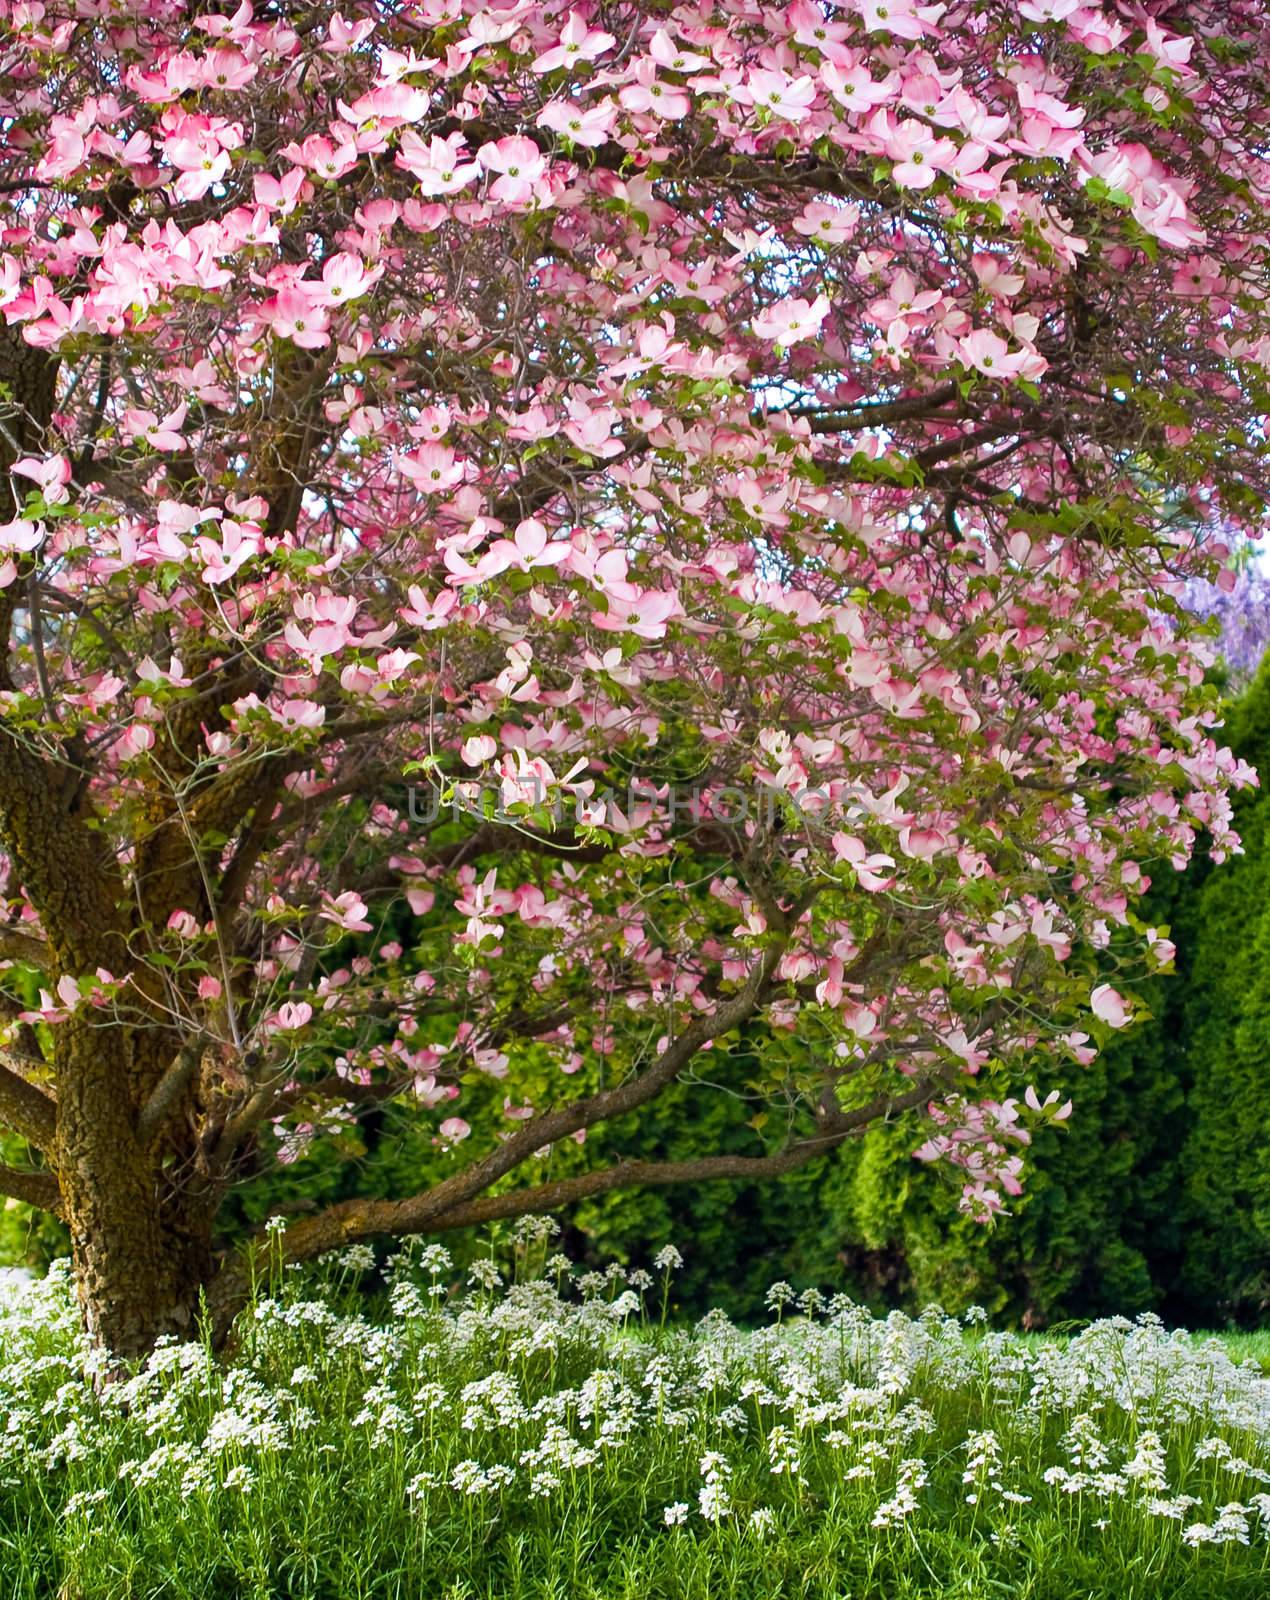 Pink blooms adorn a Dogwood tree in spring